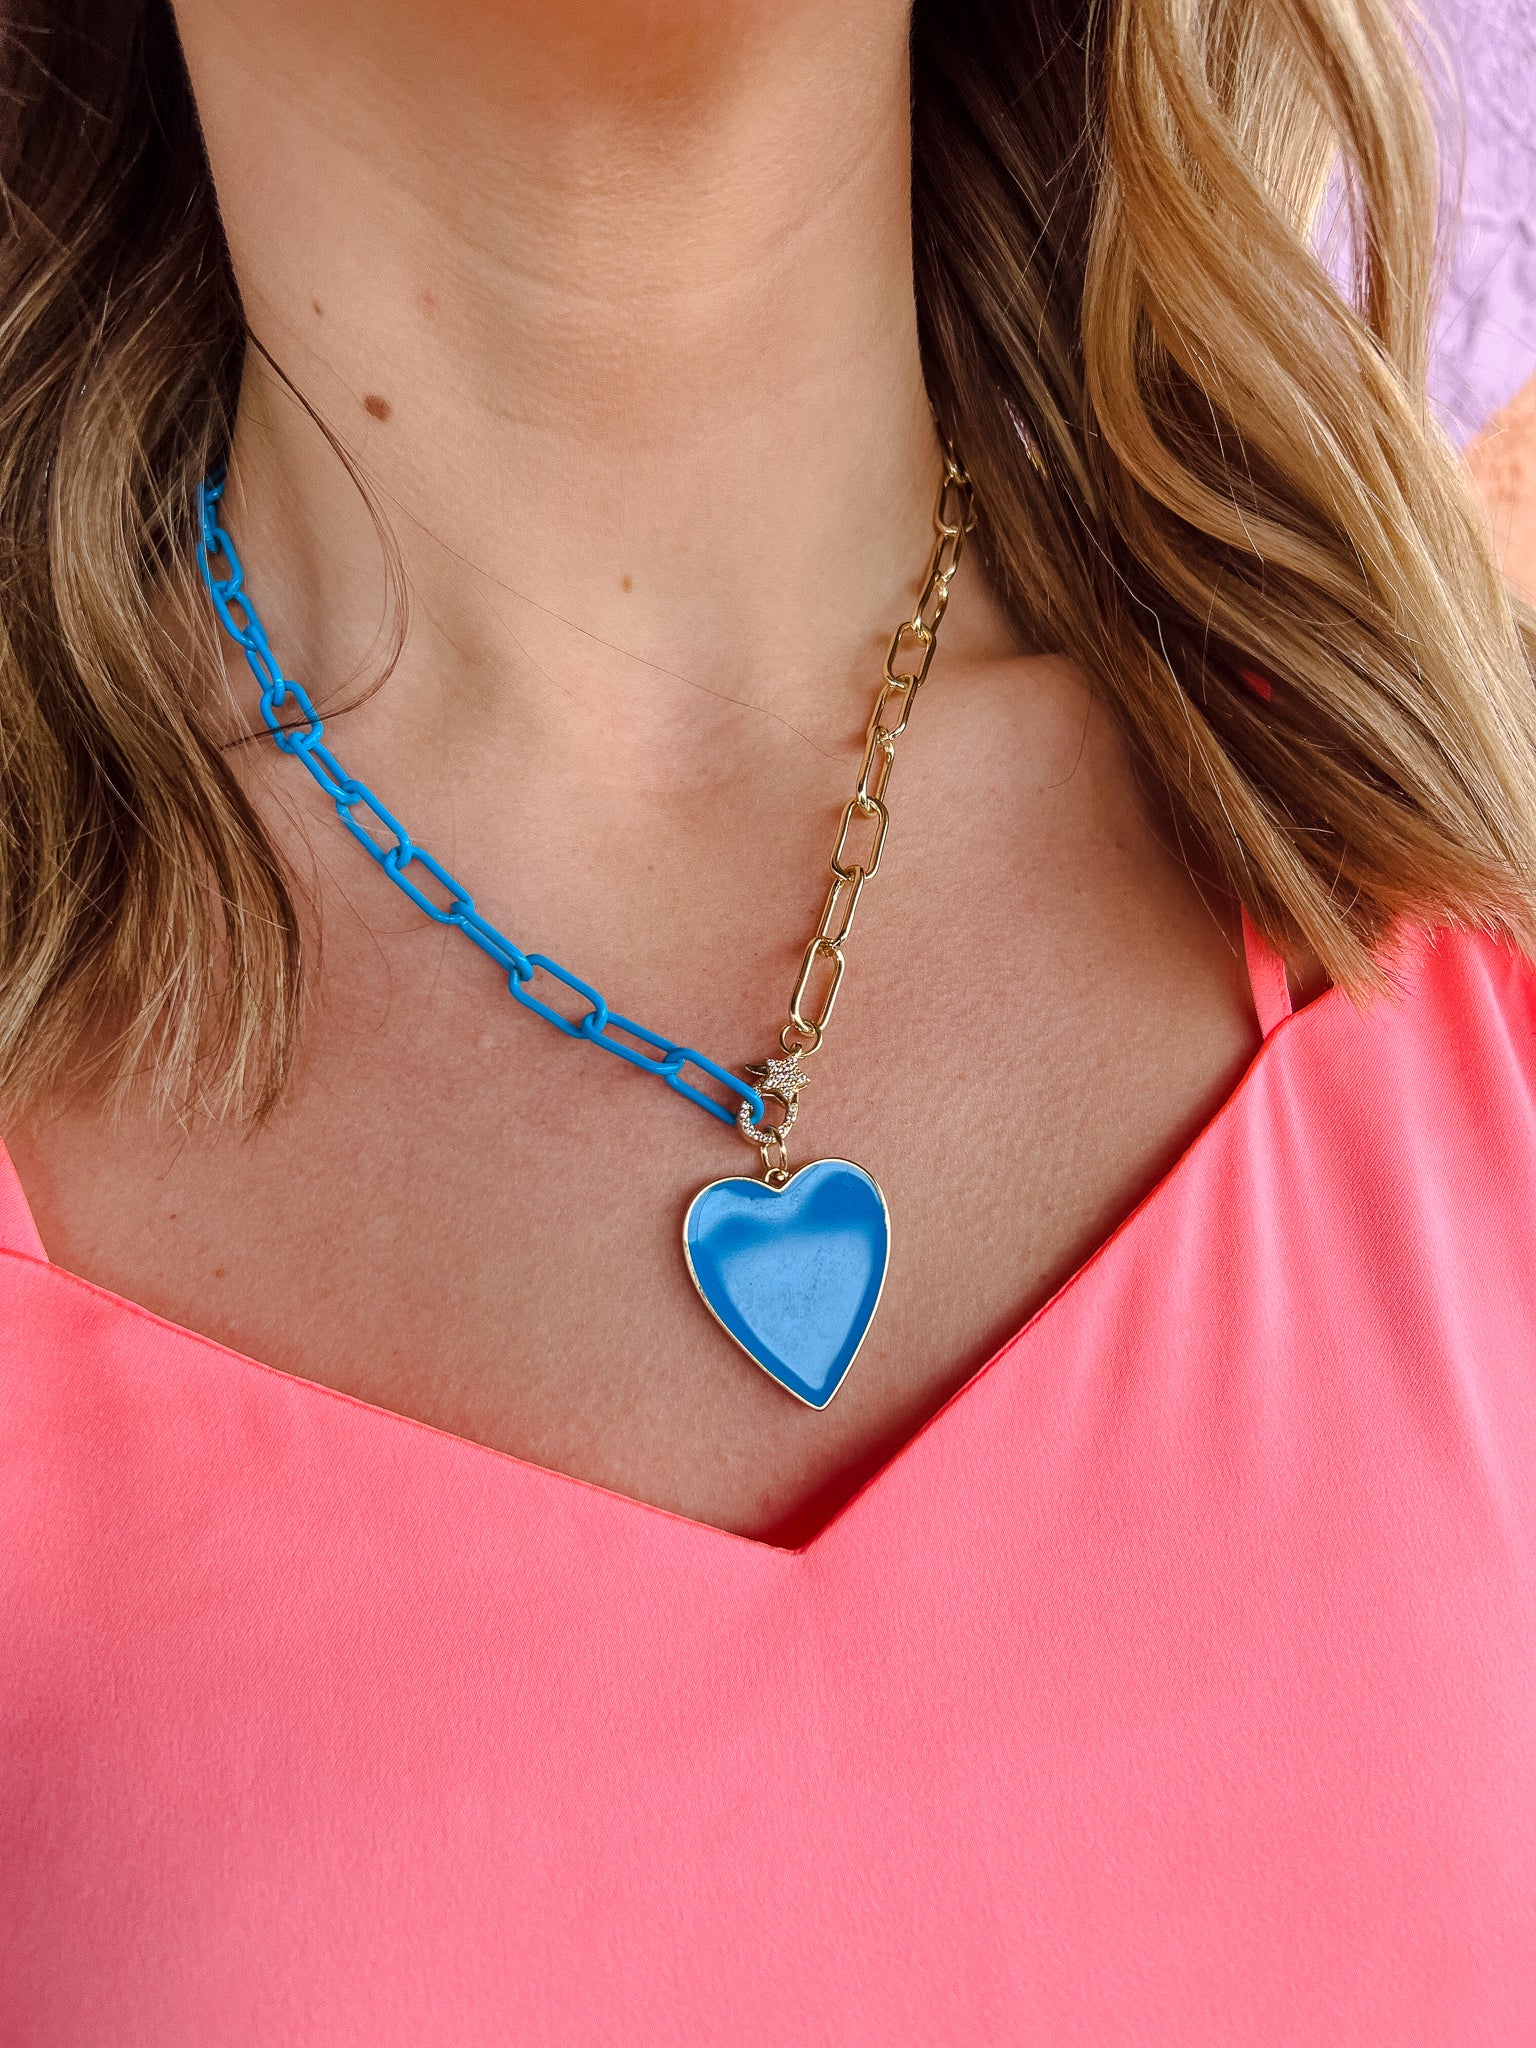 [Treasure Jewels] Shannon Blue Heart Chain Necklace - Turquoise Blue